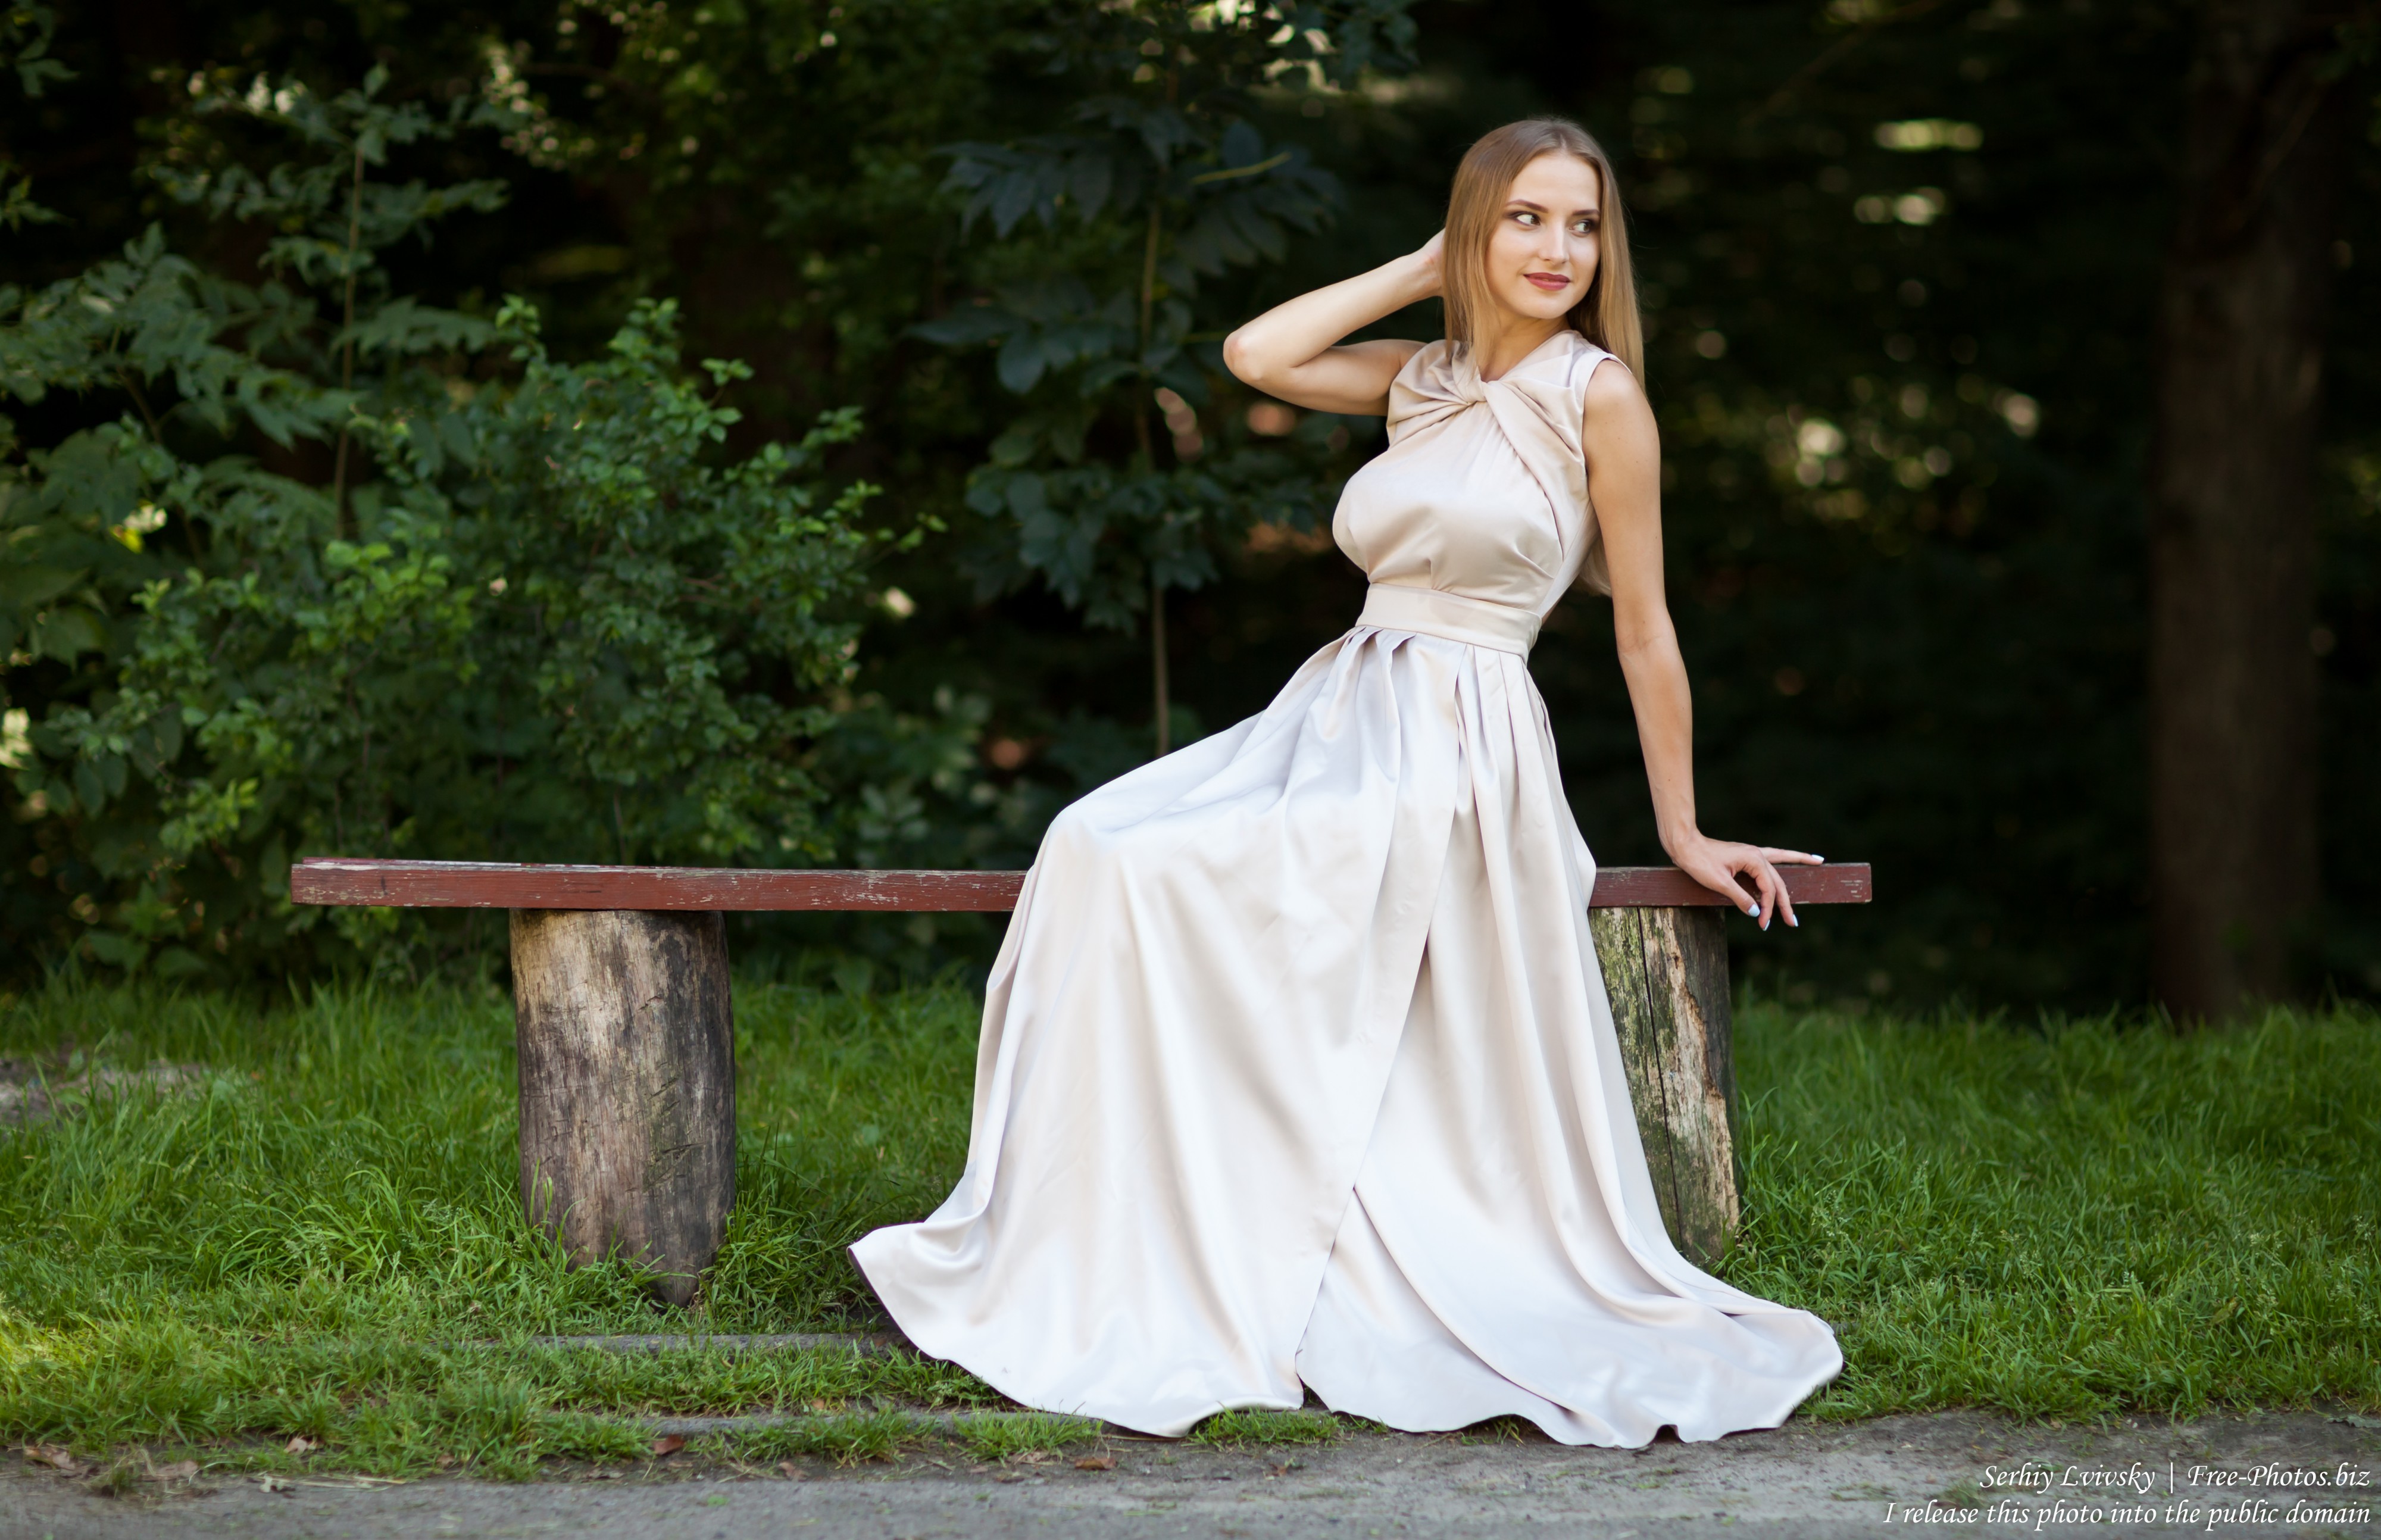 Marta - a 21-year-old natural blonde Catholic girl photographed by Serhiy Lvivsky in August 2017, picture 33